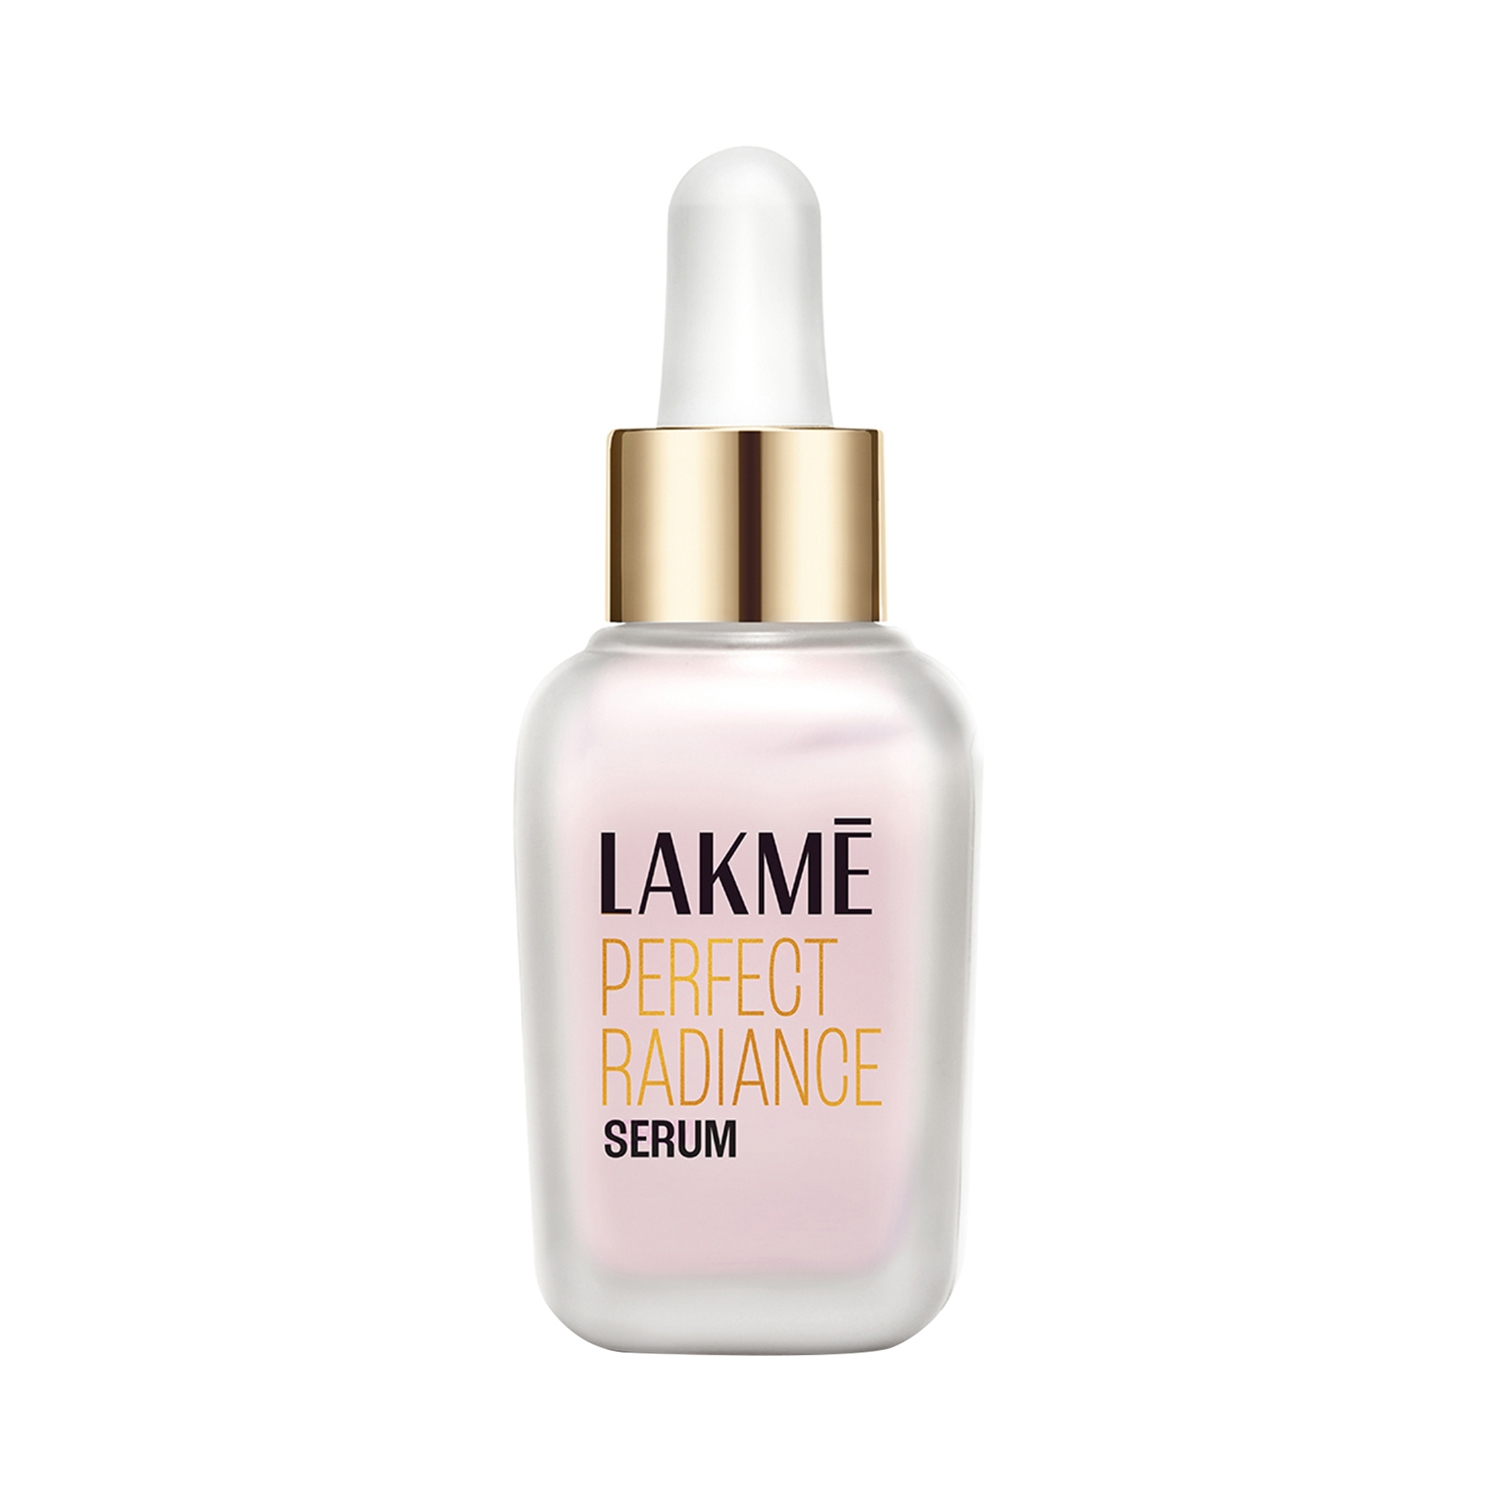 Lakme | Lakme Absolute Perfect Radiance Serum with 7% Niacinamide Complex (15ml)